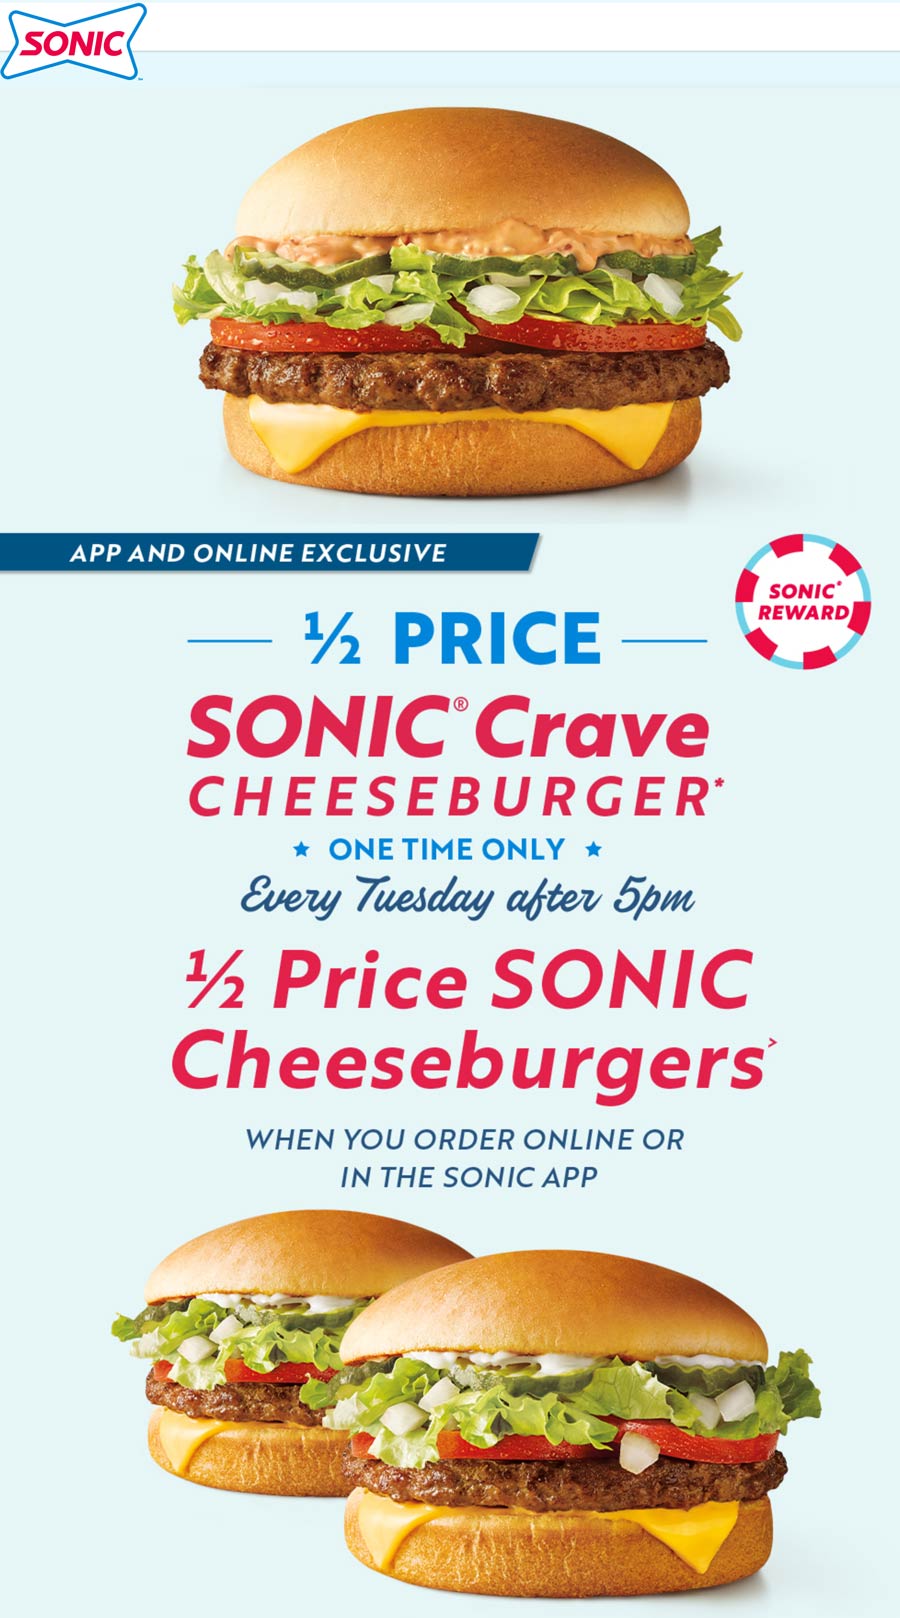 Sonic Drive-In restaurants Coupon  50% off a crave cheeseburger online at Sonic Drive-In #sonicdrivein 